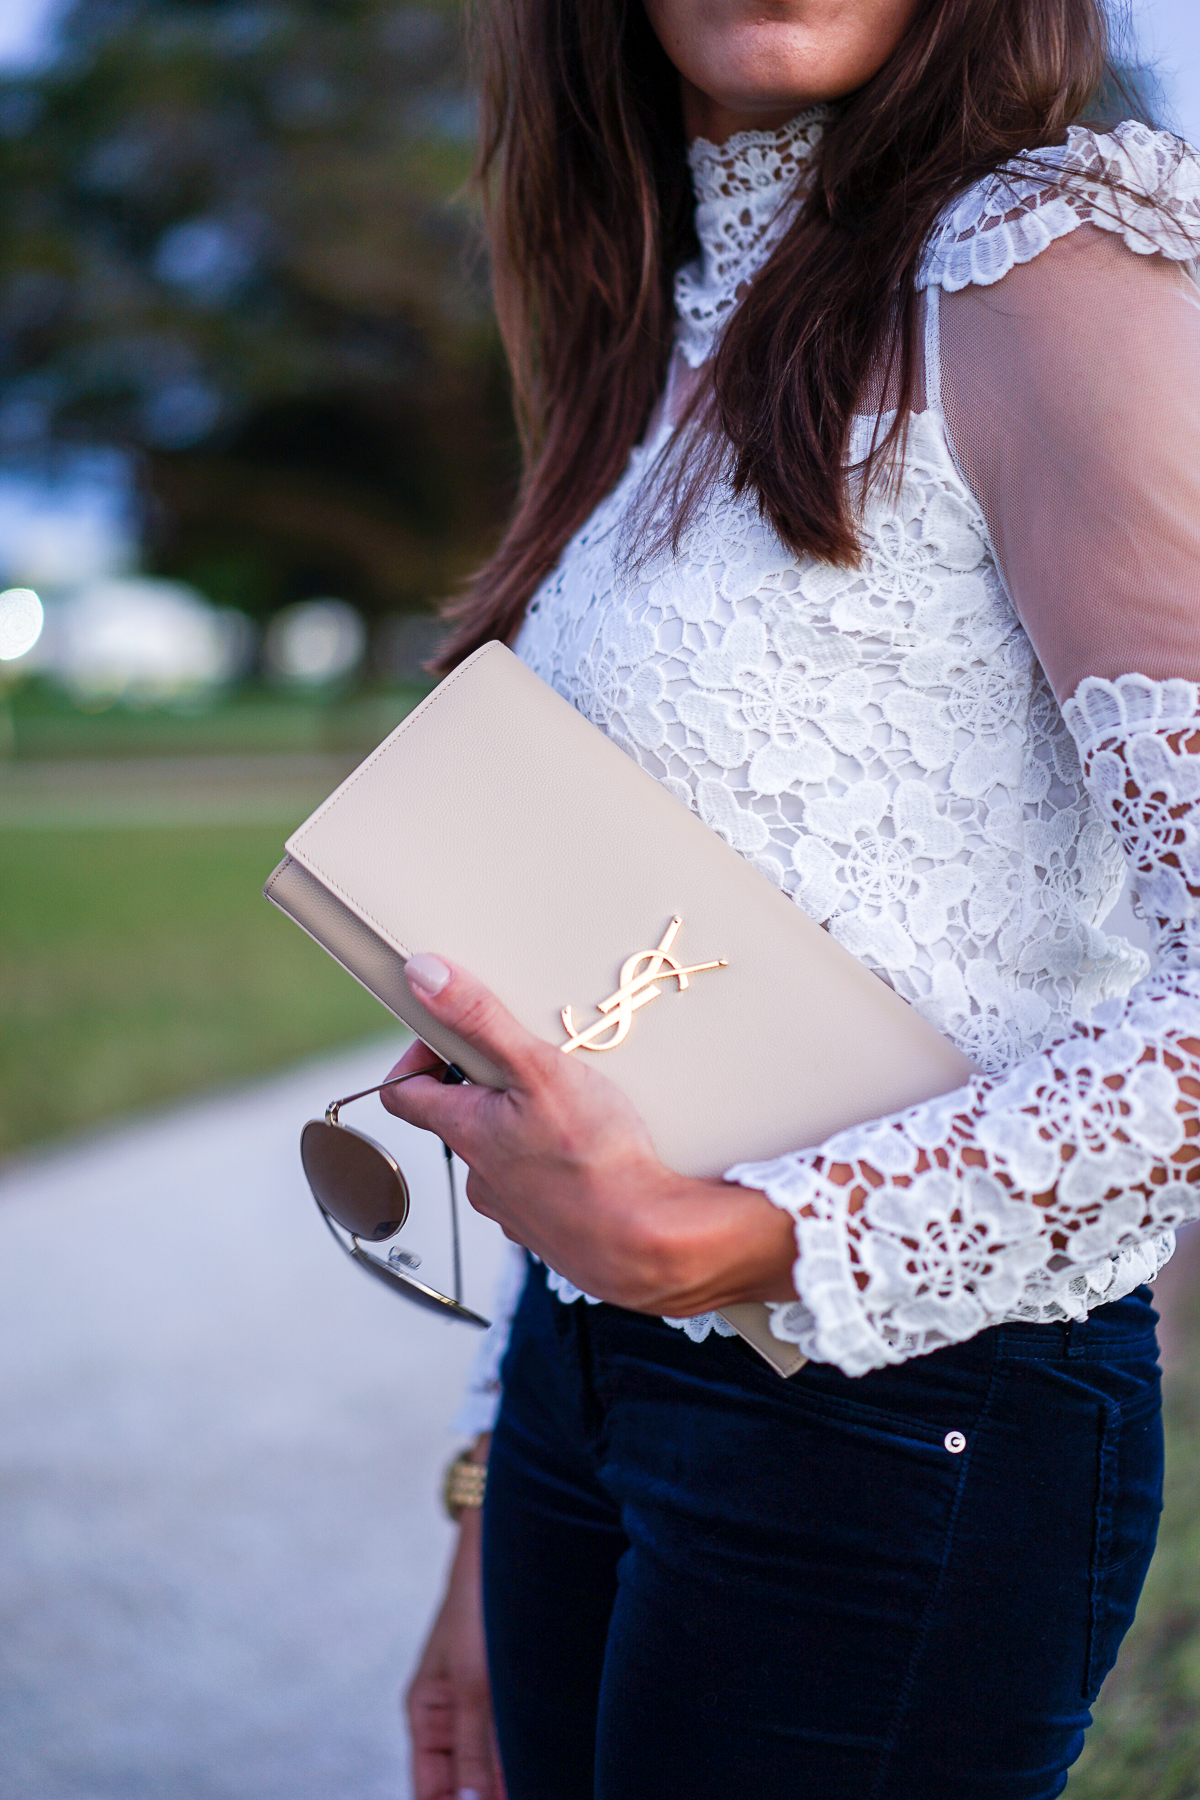 A Glam Lifestyle blogger carrying YSL monogram clutch in a lace blouse